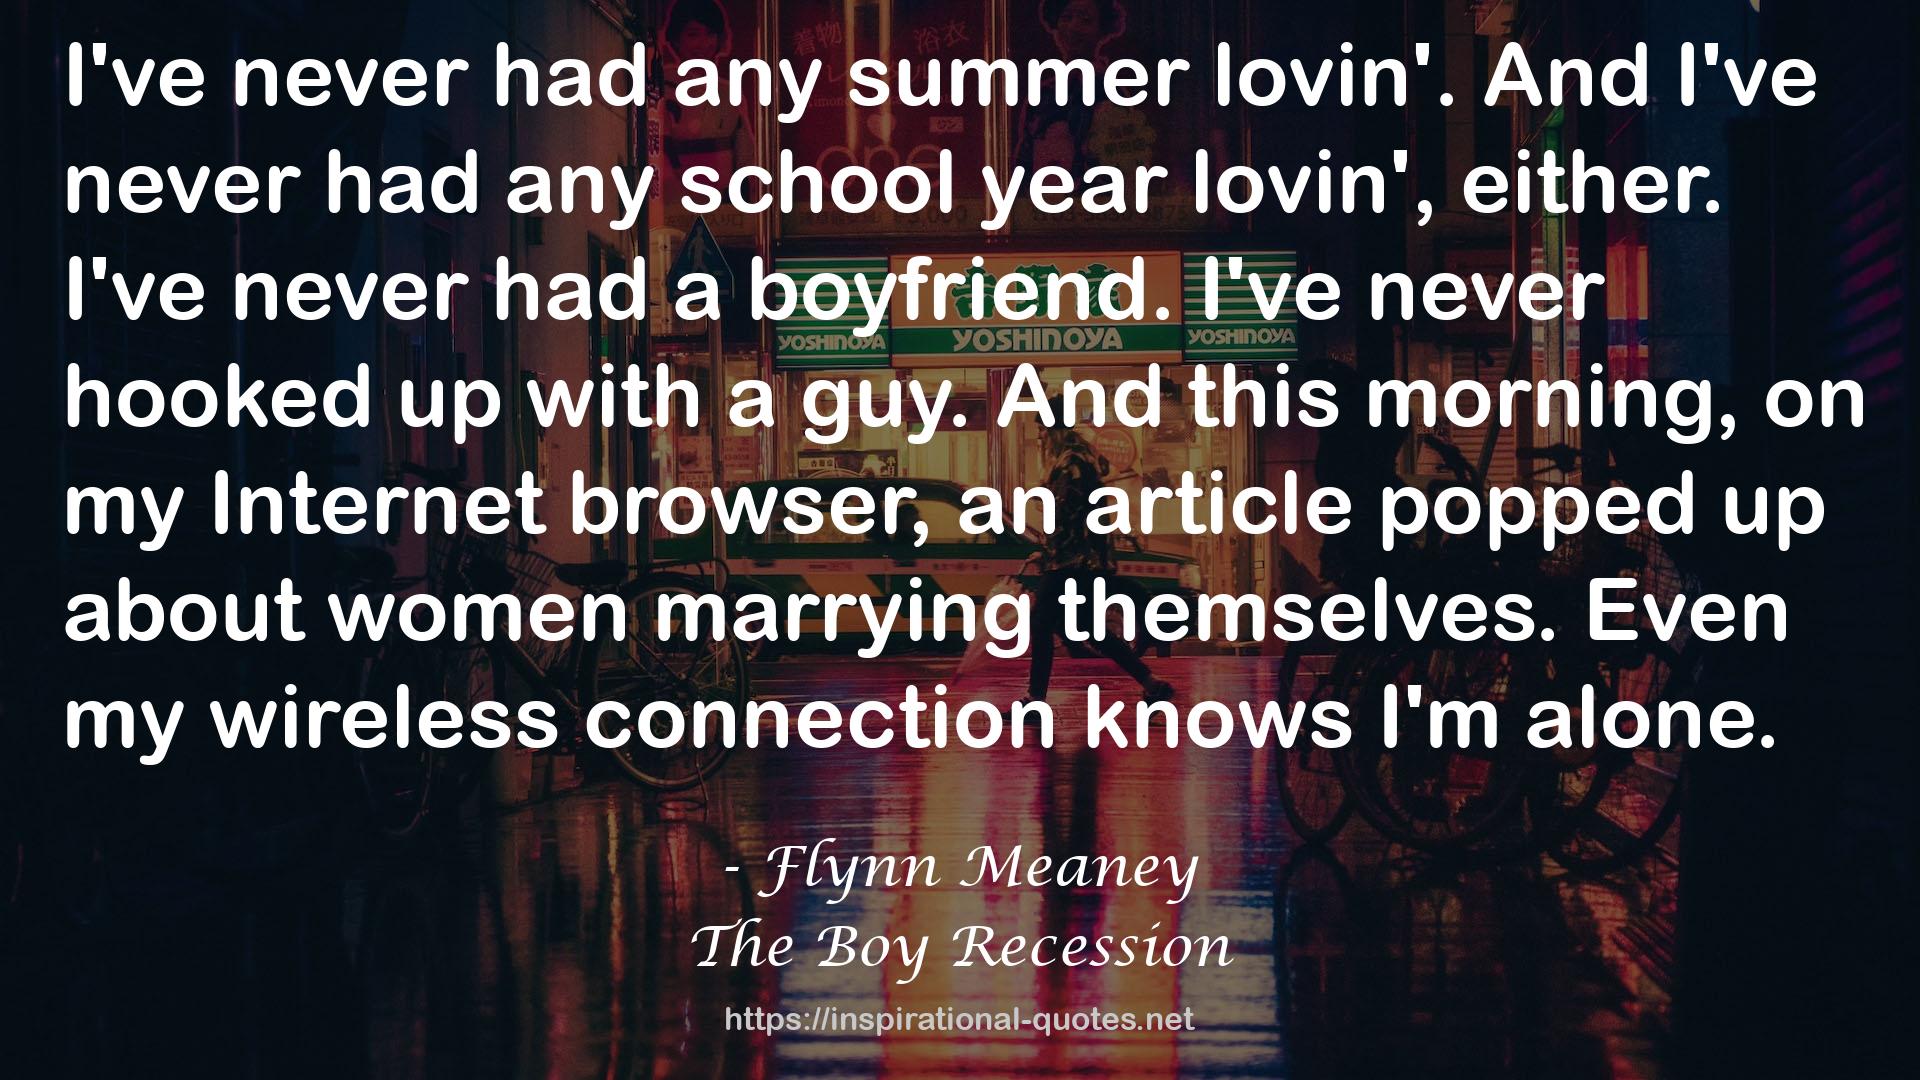 Flynn Meaney QUOTES